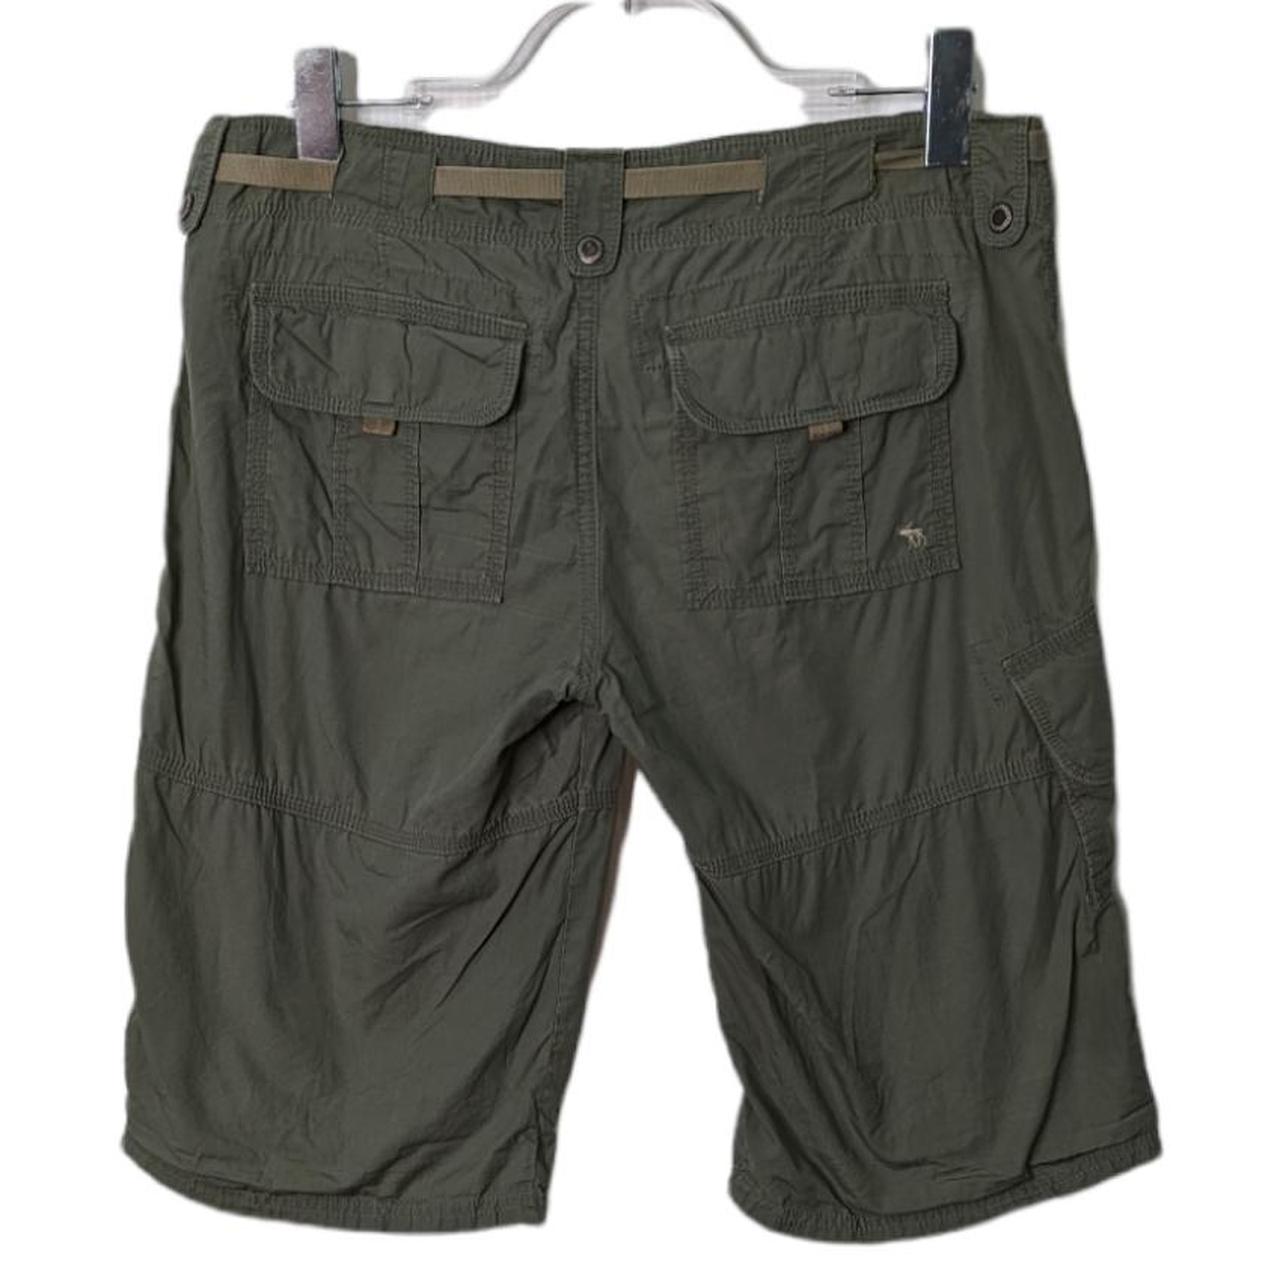 Y2K Abercrombie & Fitch Cargo Shorts Green Low Rise... - Depop